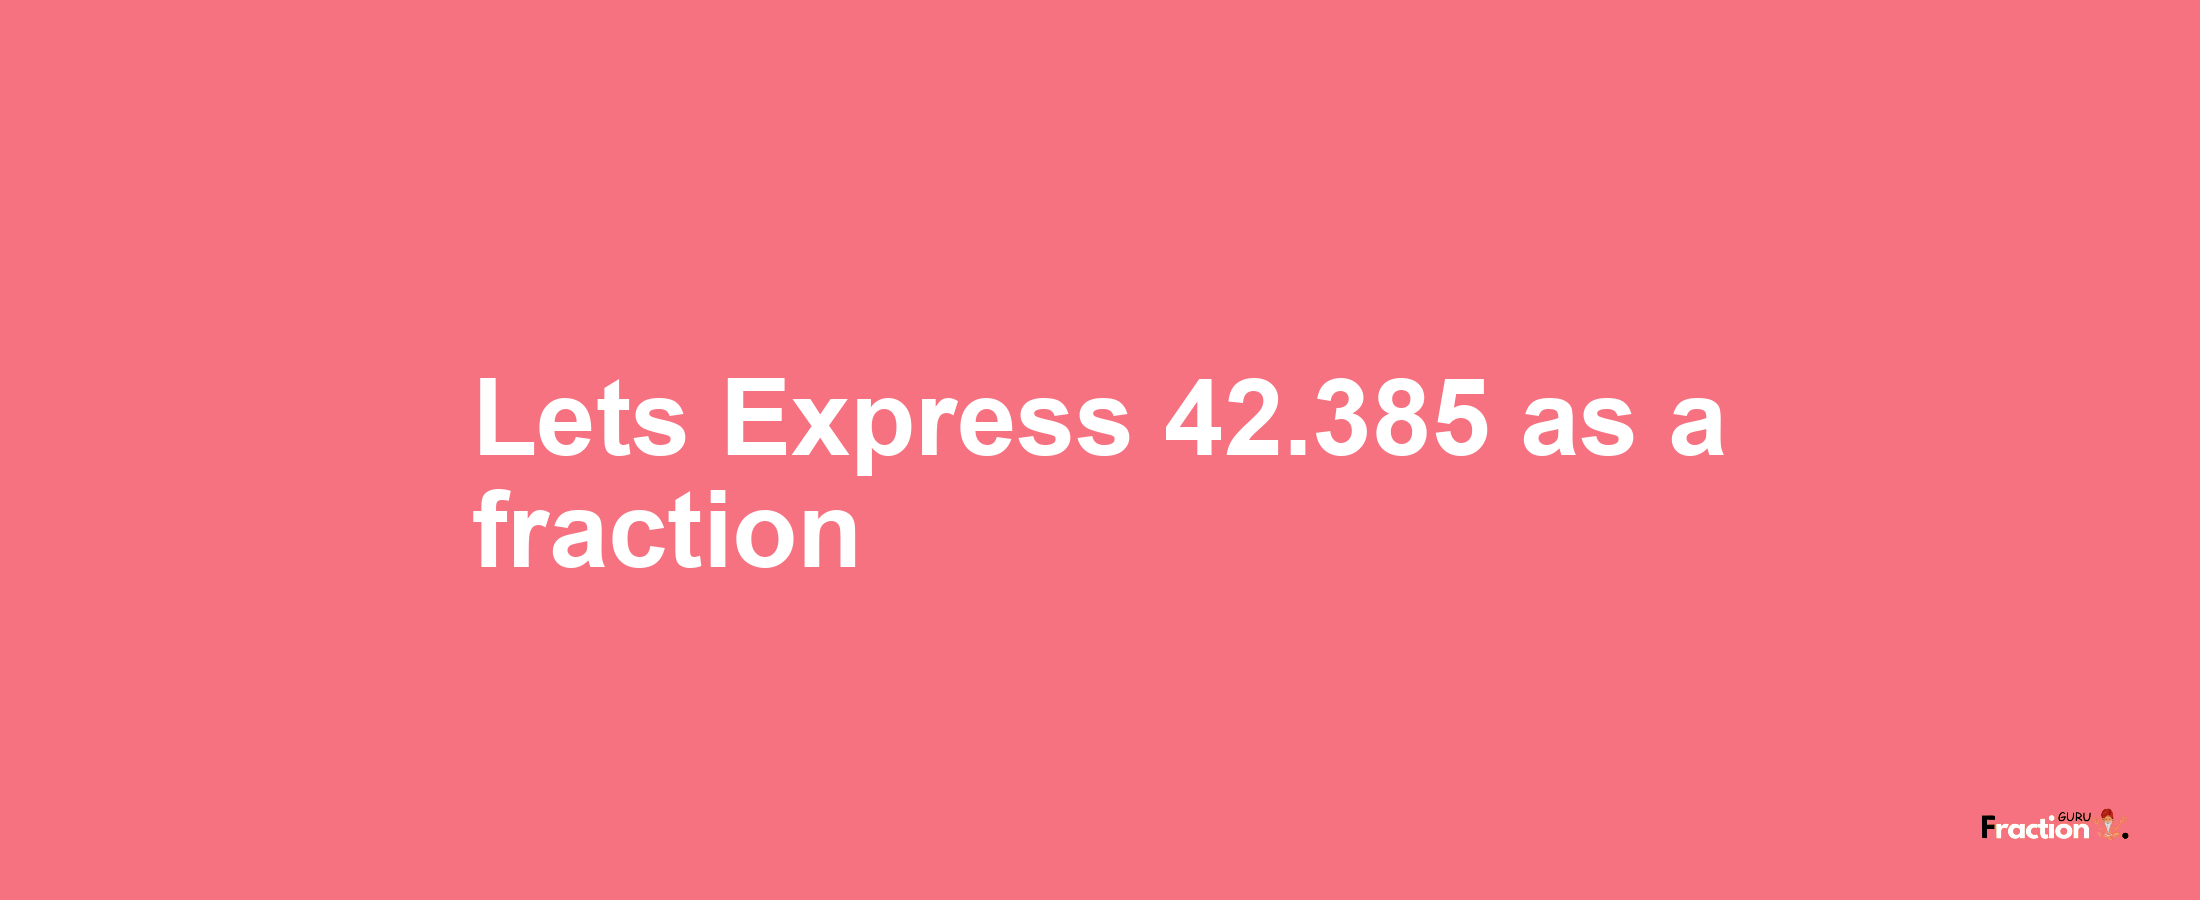 Lets Express 42.385 as afraction